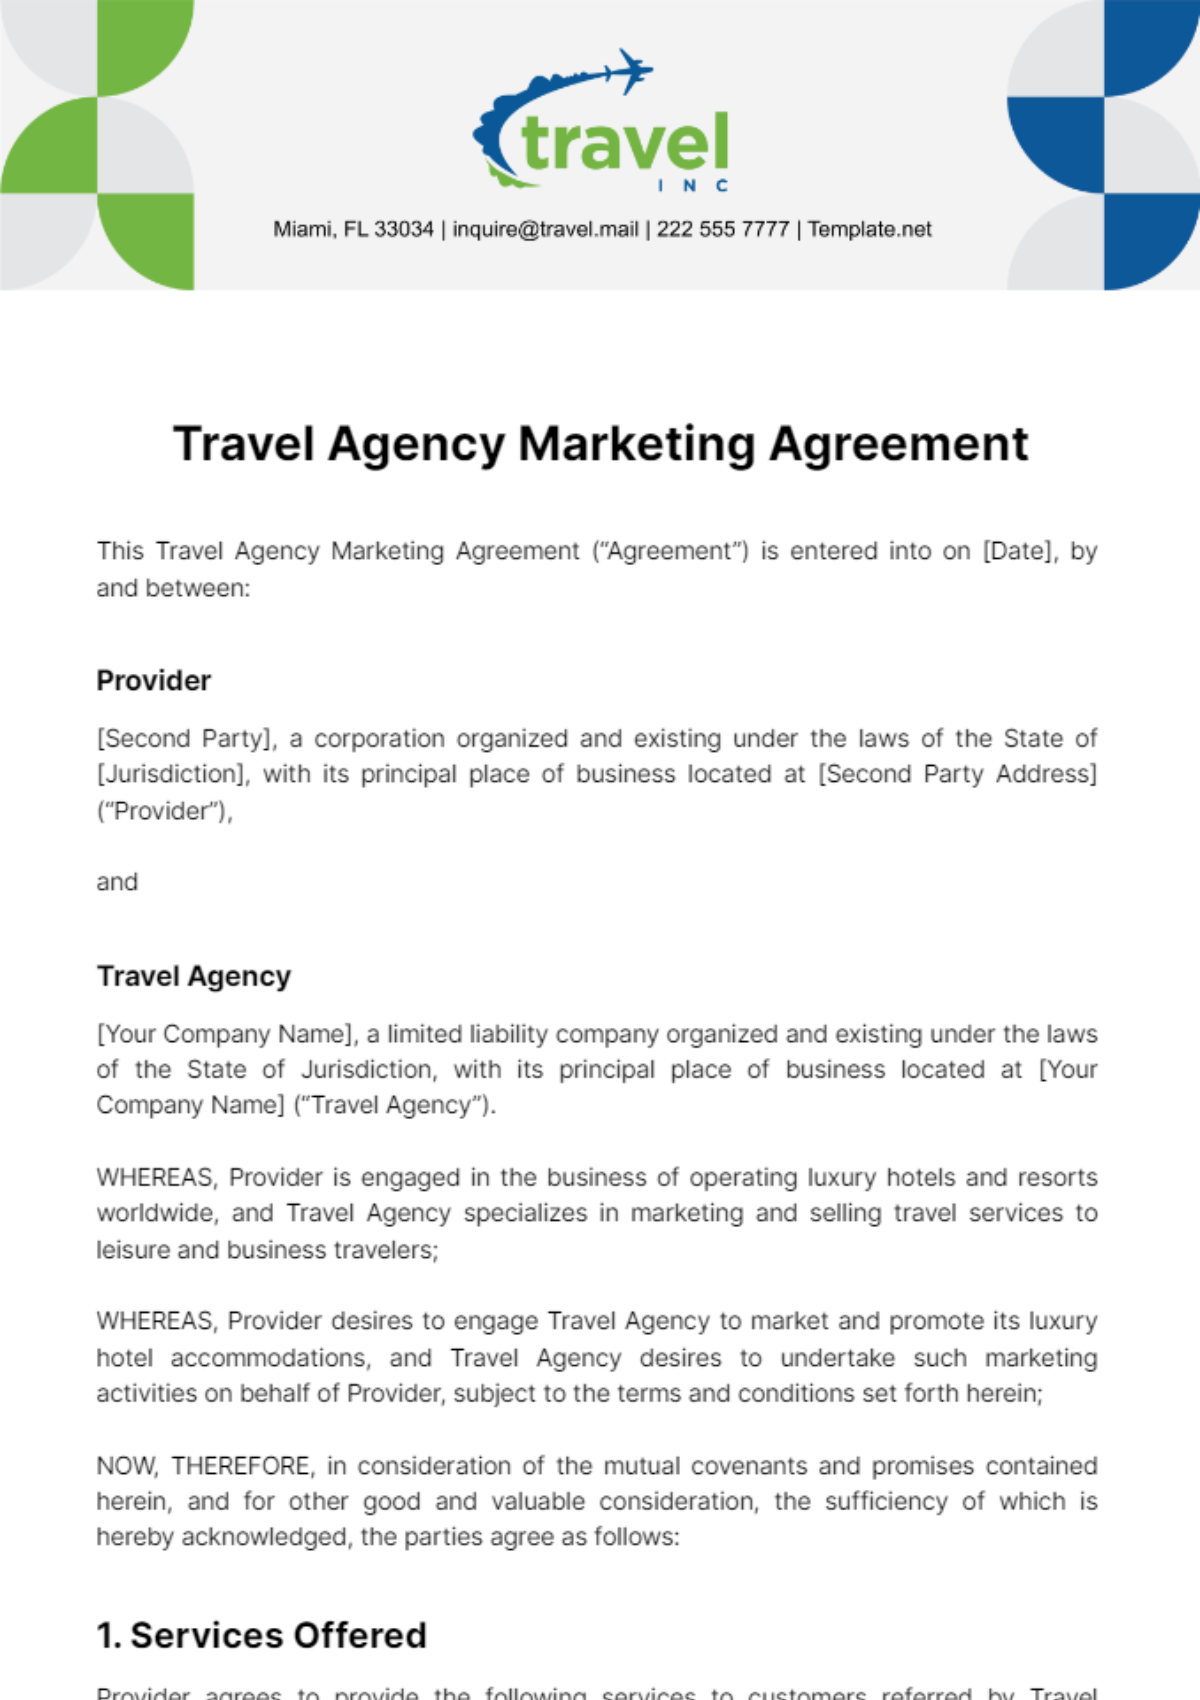 Travel Agency Marketing Agreement Template